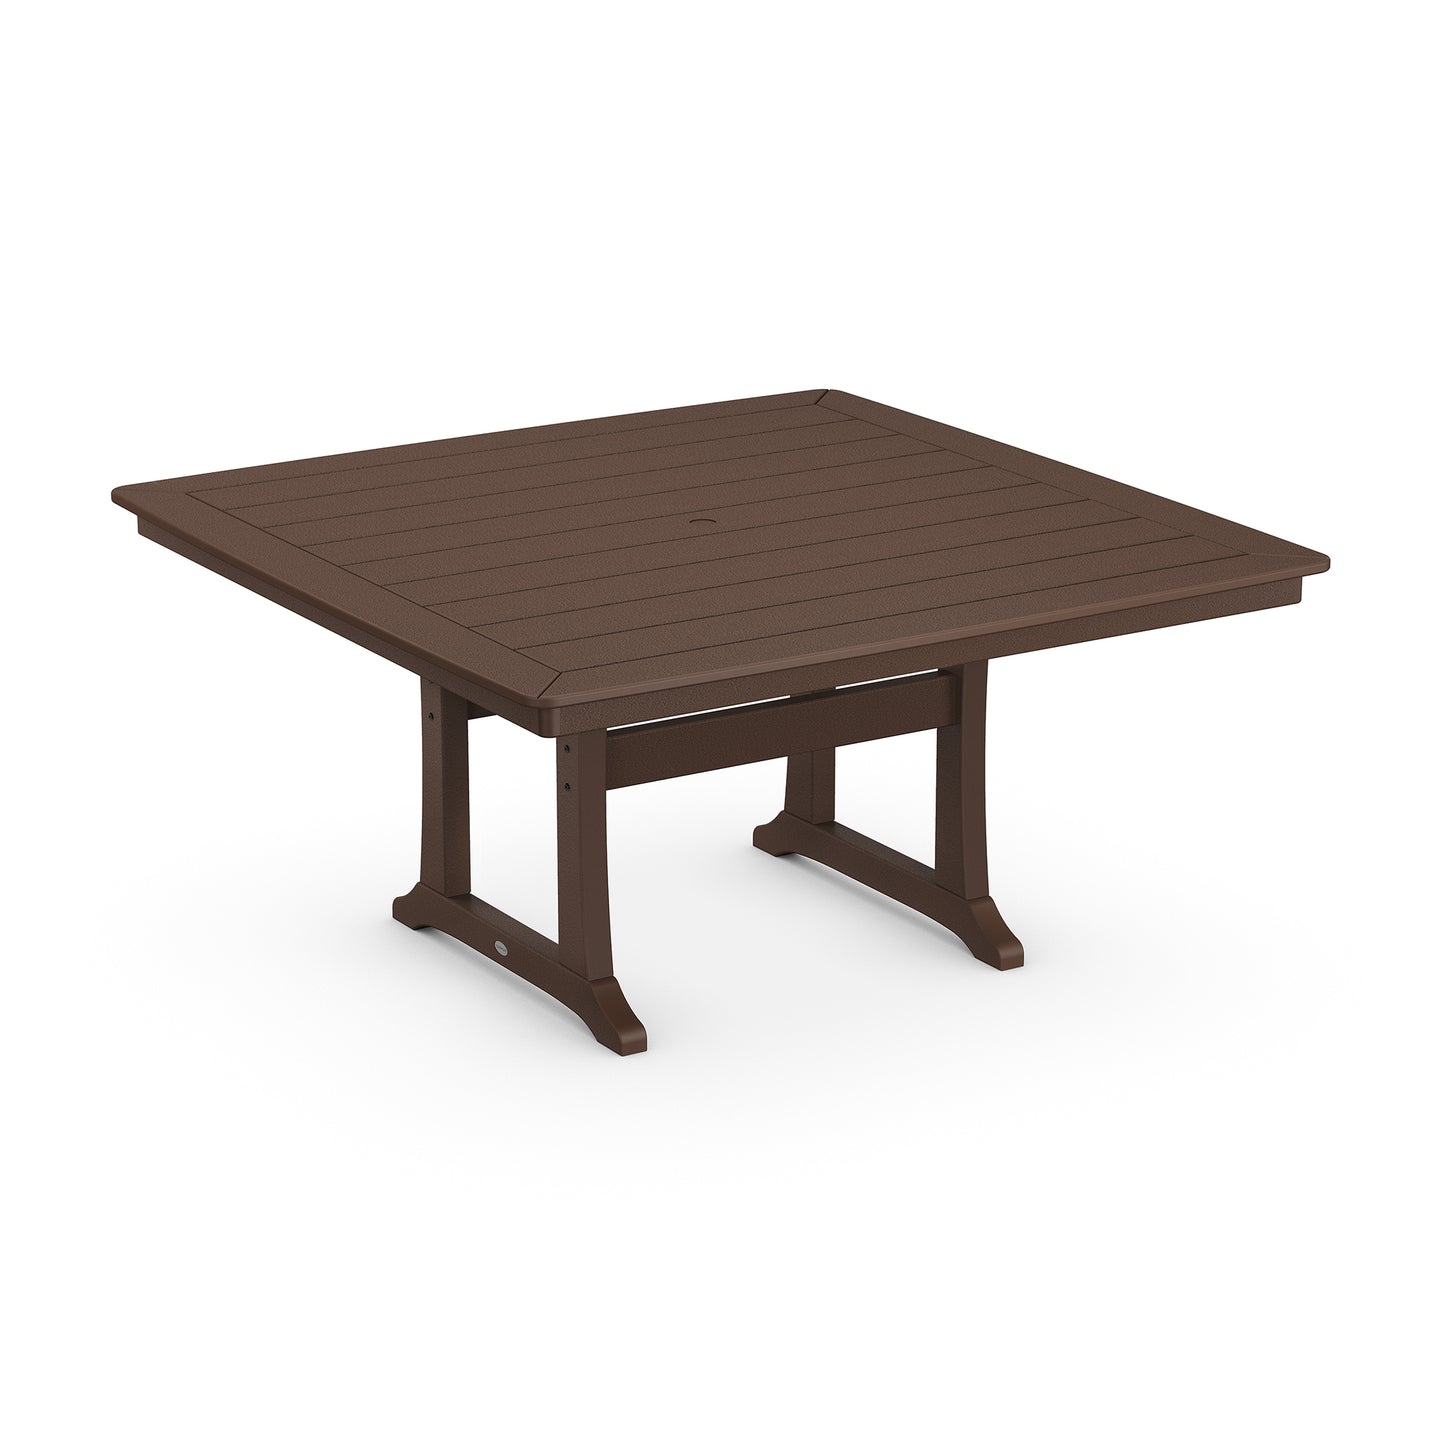 A POLYWOOD Nautical Trestle 59" Dining Table in a dark brown color with plank-style top and sturdy leg design, displayed on a plain white background.